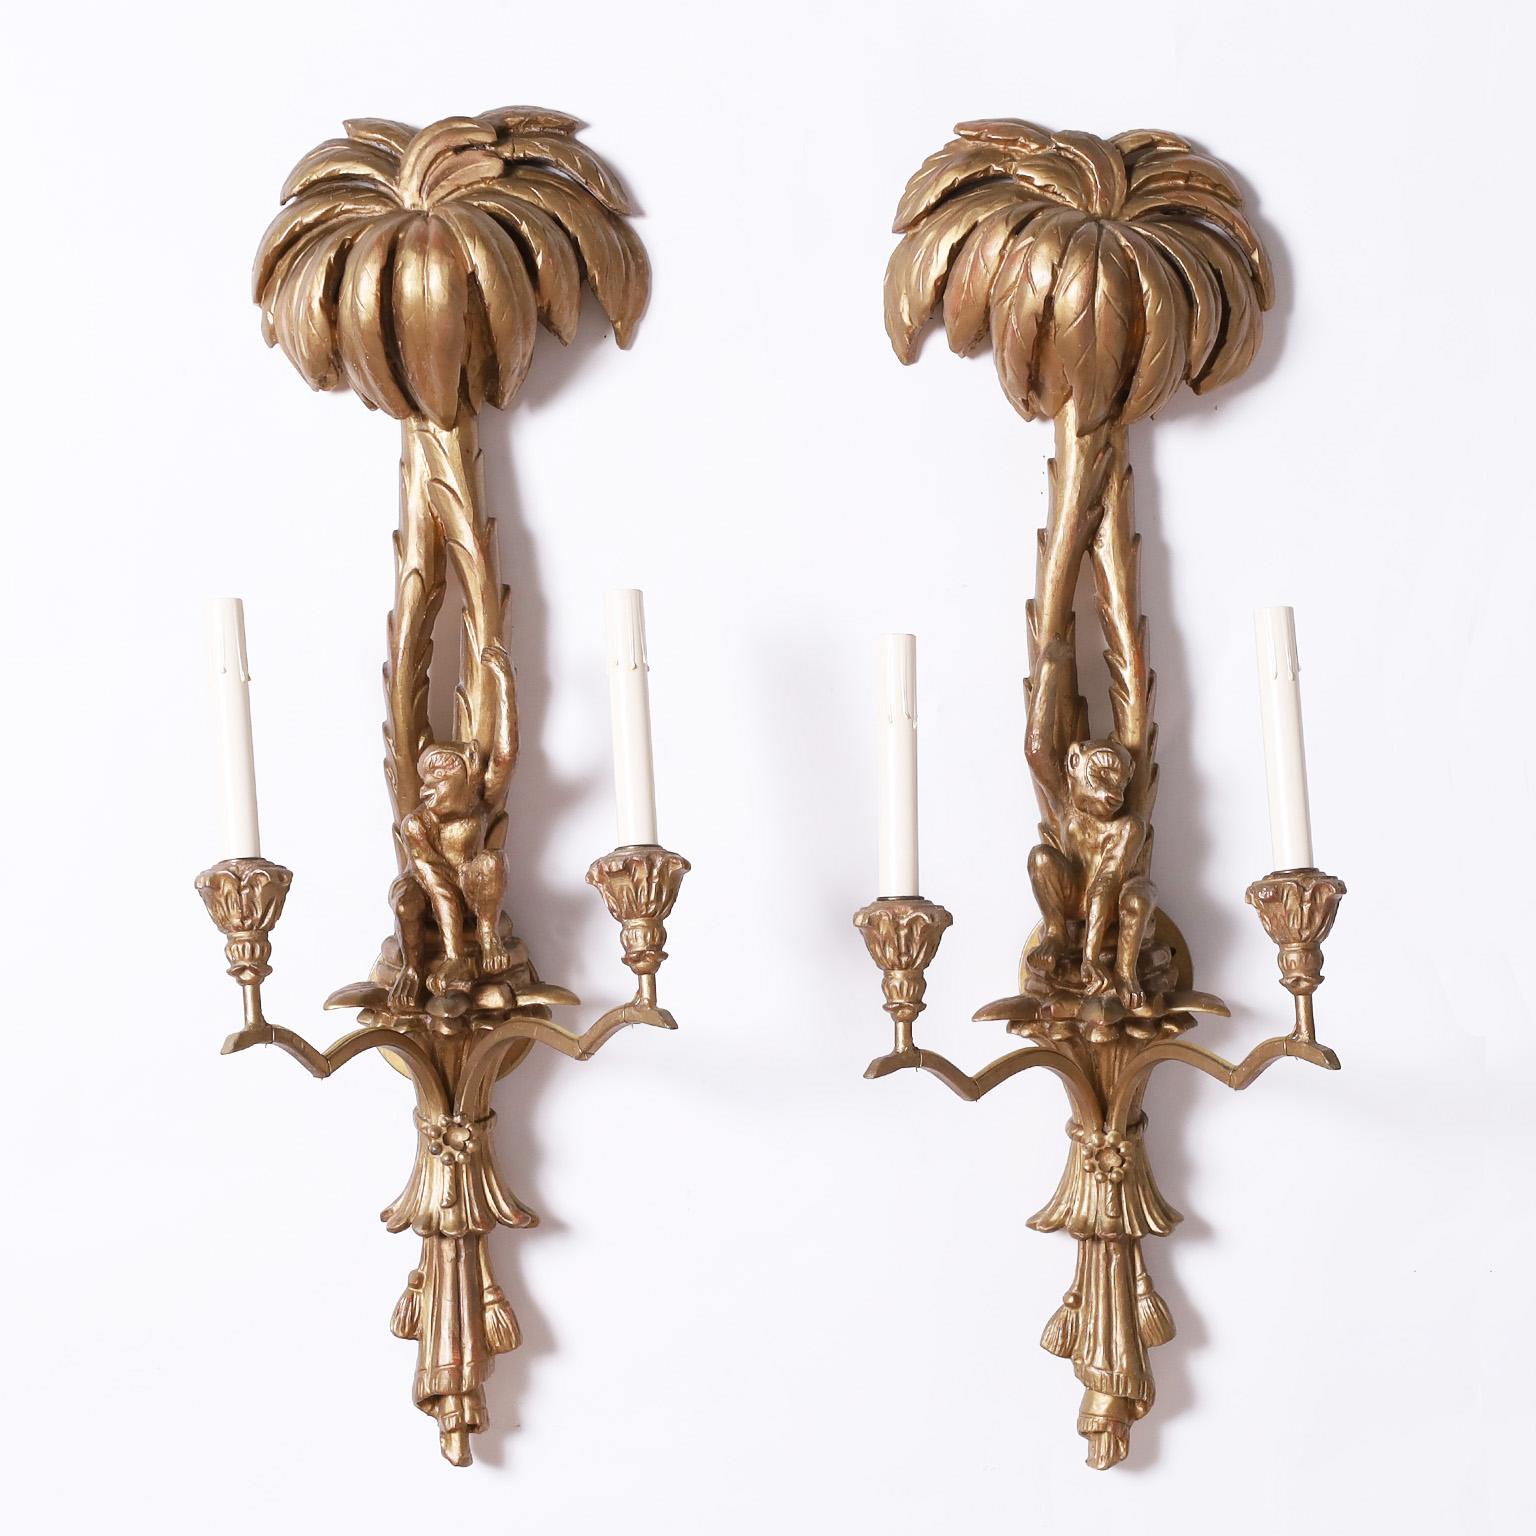 Whimsical pair of Italian two light wall sconces crafted in carved wood with palm trees over monkeys and drape and tassels at the bottoms.